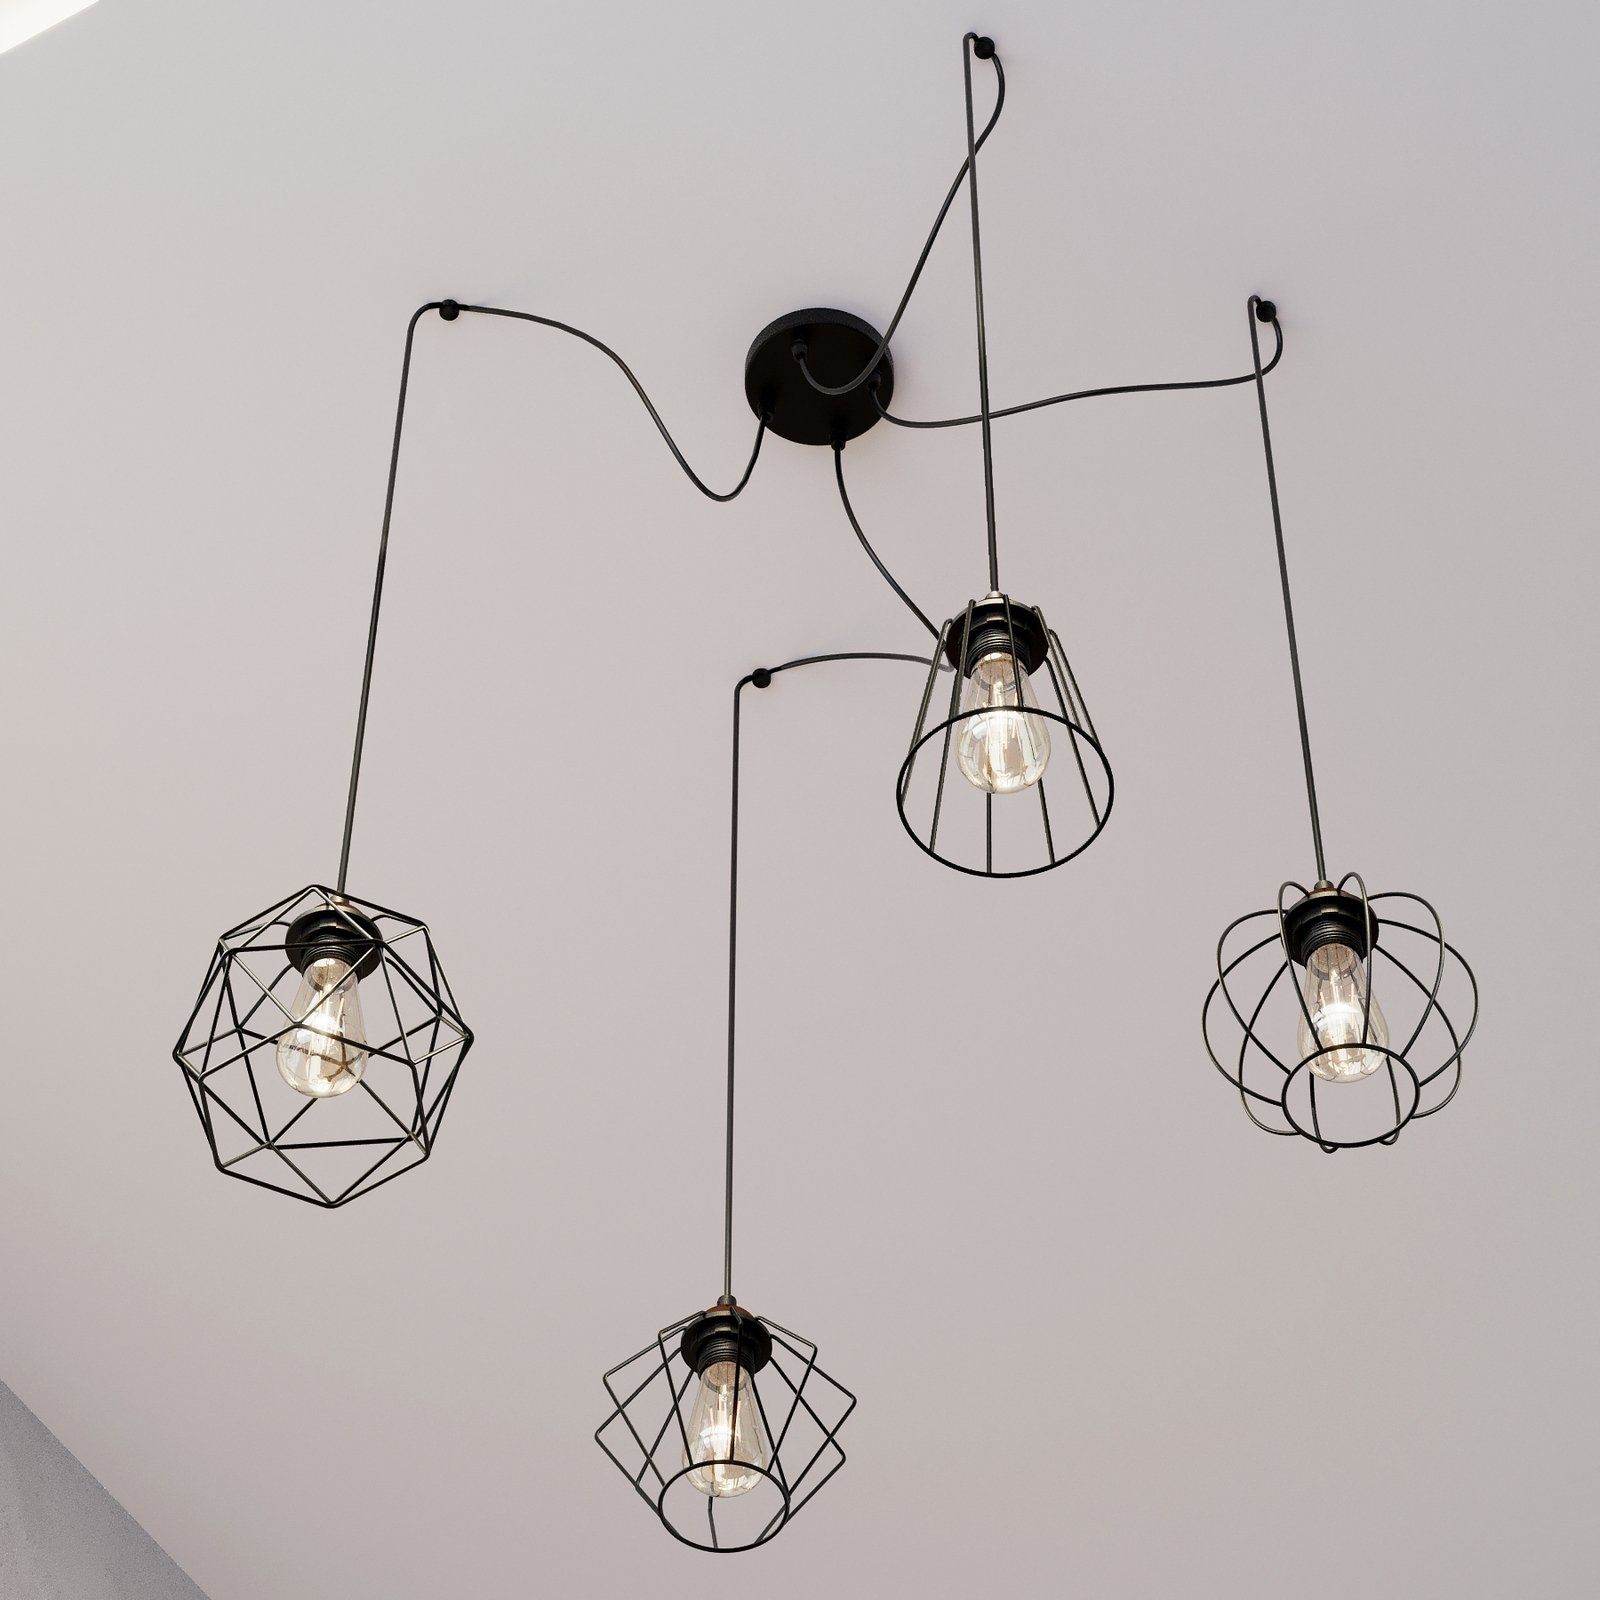 Galaxy pendant light with four cage lampshades